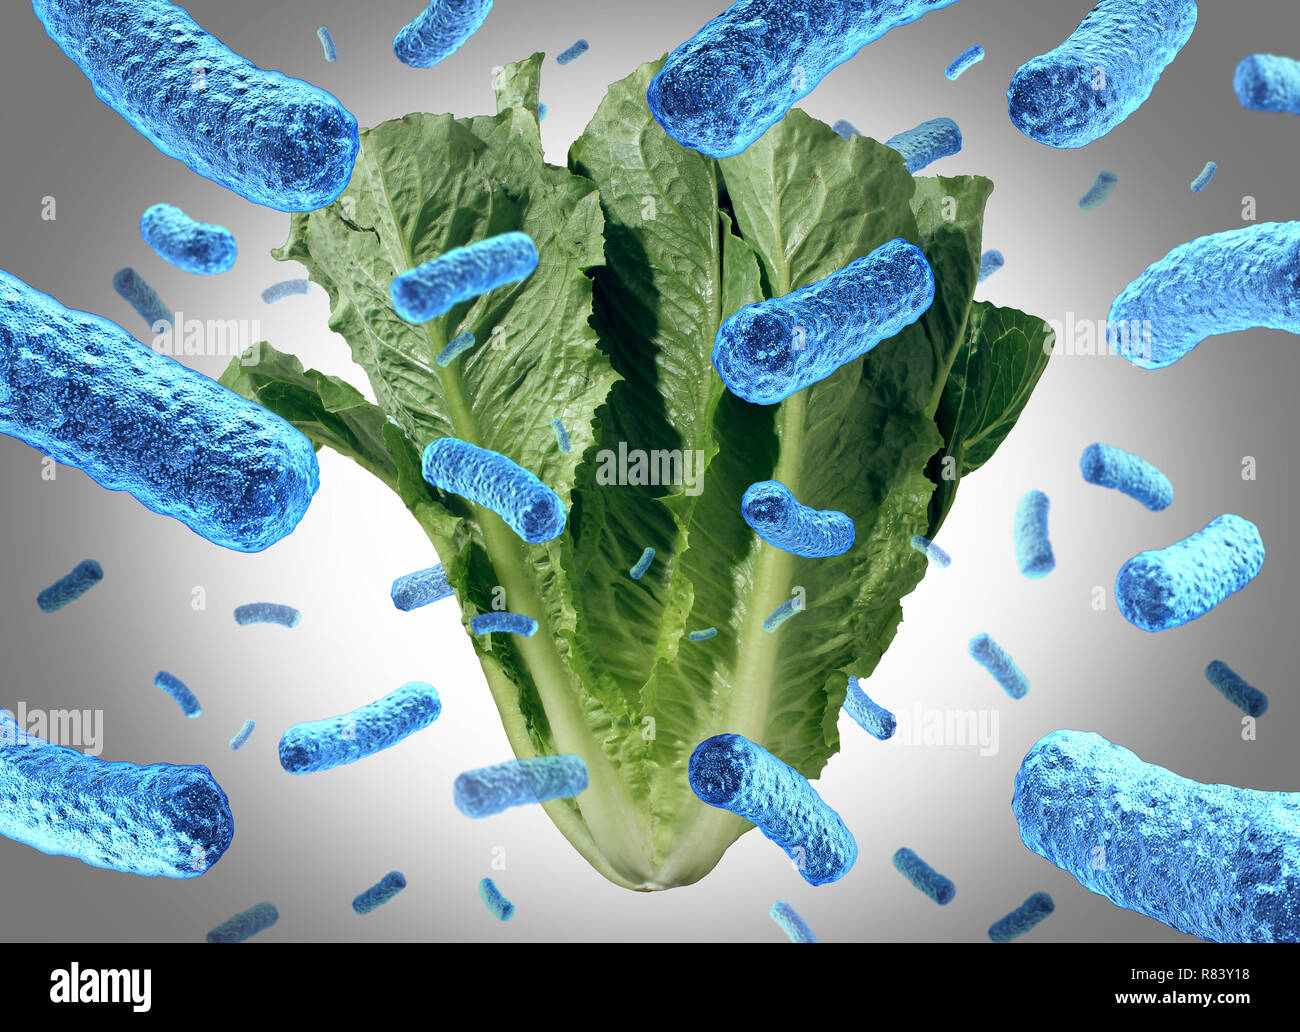 Romaine lettuce e coli outbreak food poisoning as a vegetable contamination or bacteria public health risk in a salad with 3D illustration elements. Stock Photo